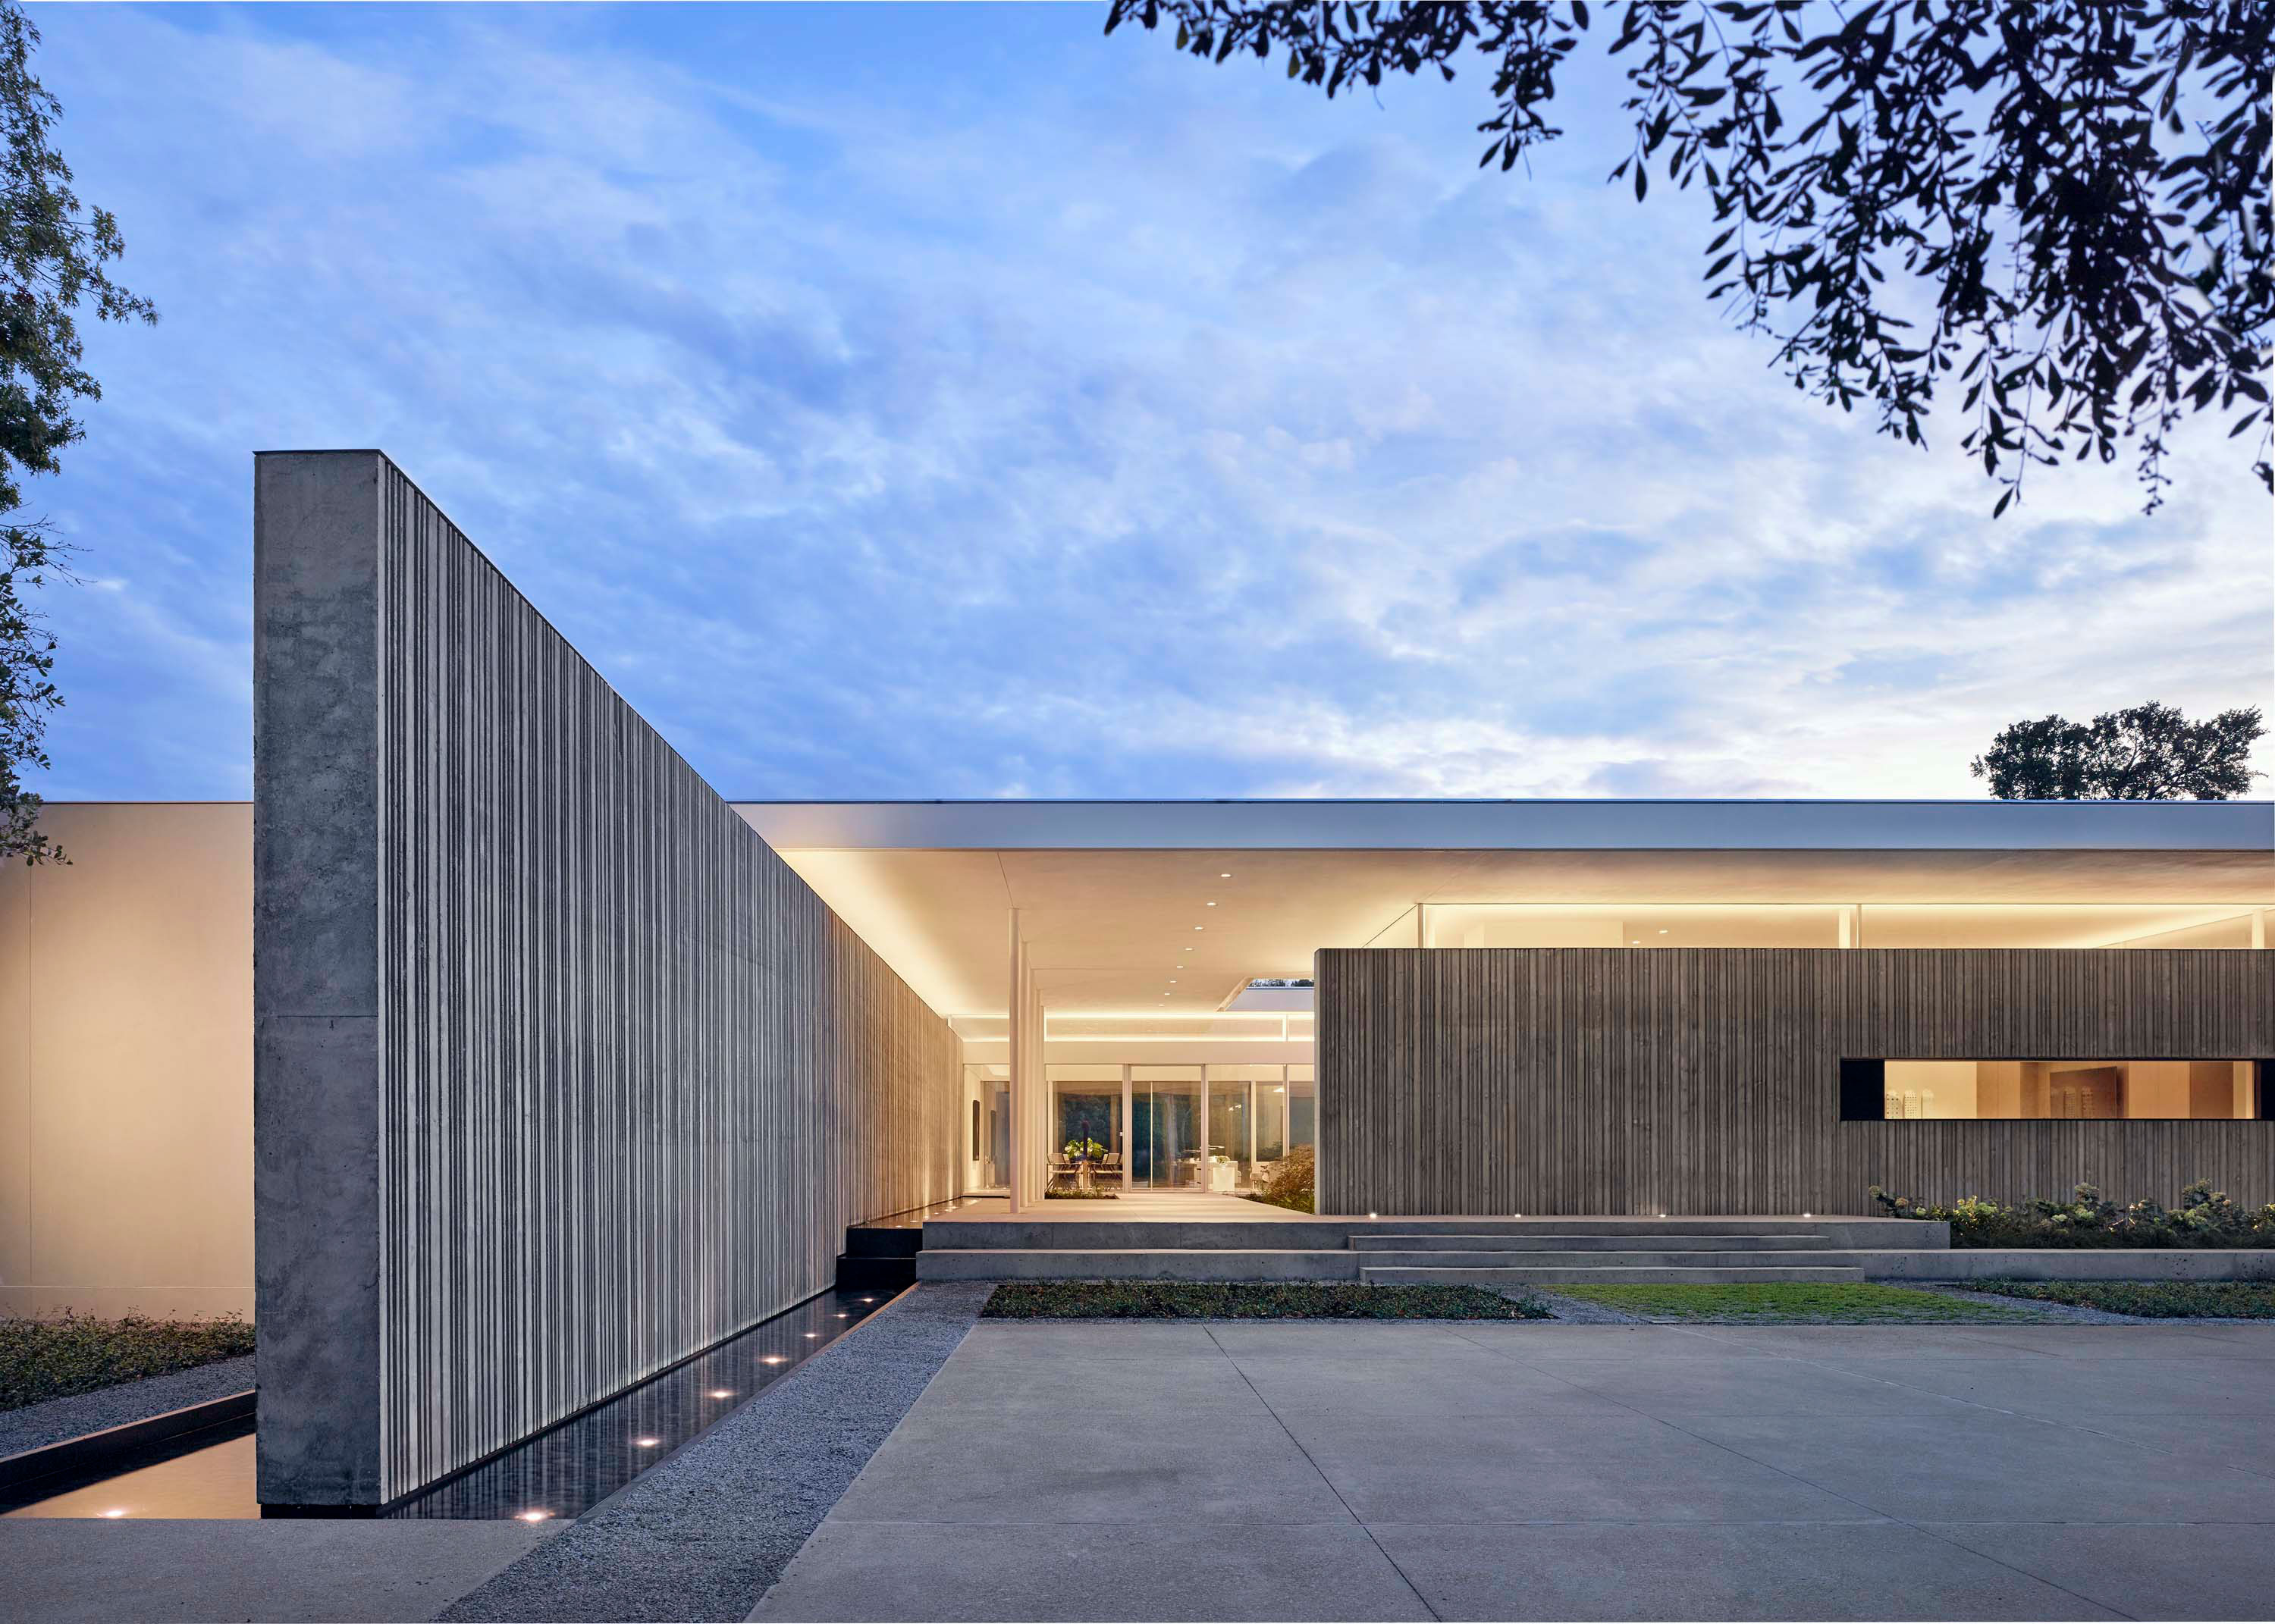 Exterior photo of the Preston Hollow Residence by Specht Novak Architects. Shot in the afternoon by Manolo Langis, featuring the entrance to the home, and monolithic concrete wall.